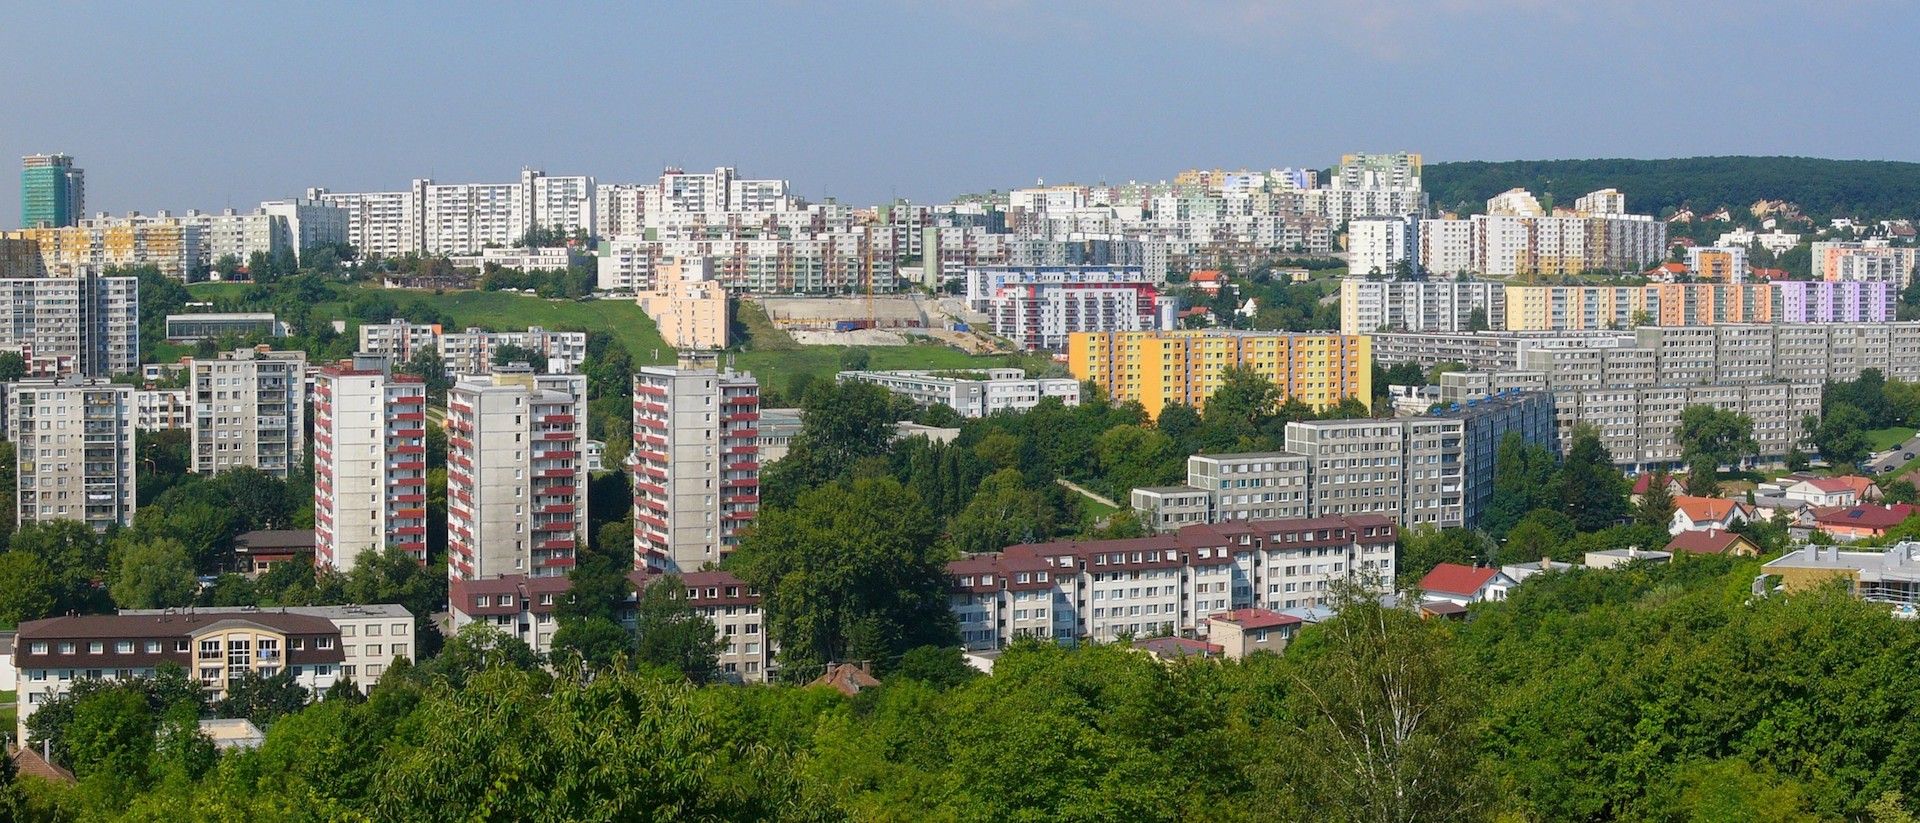 View of the Dlhé diely district in Bratislava, with colourful panel housing regeneration. Image: Teslaton under a CC licence